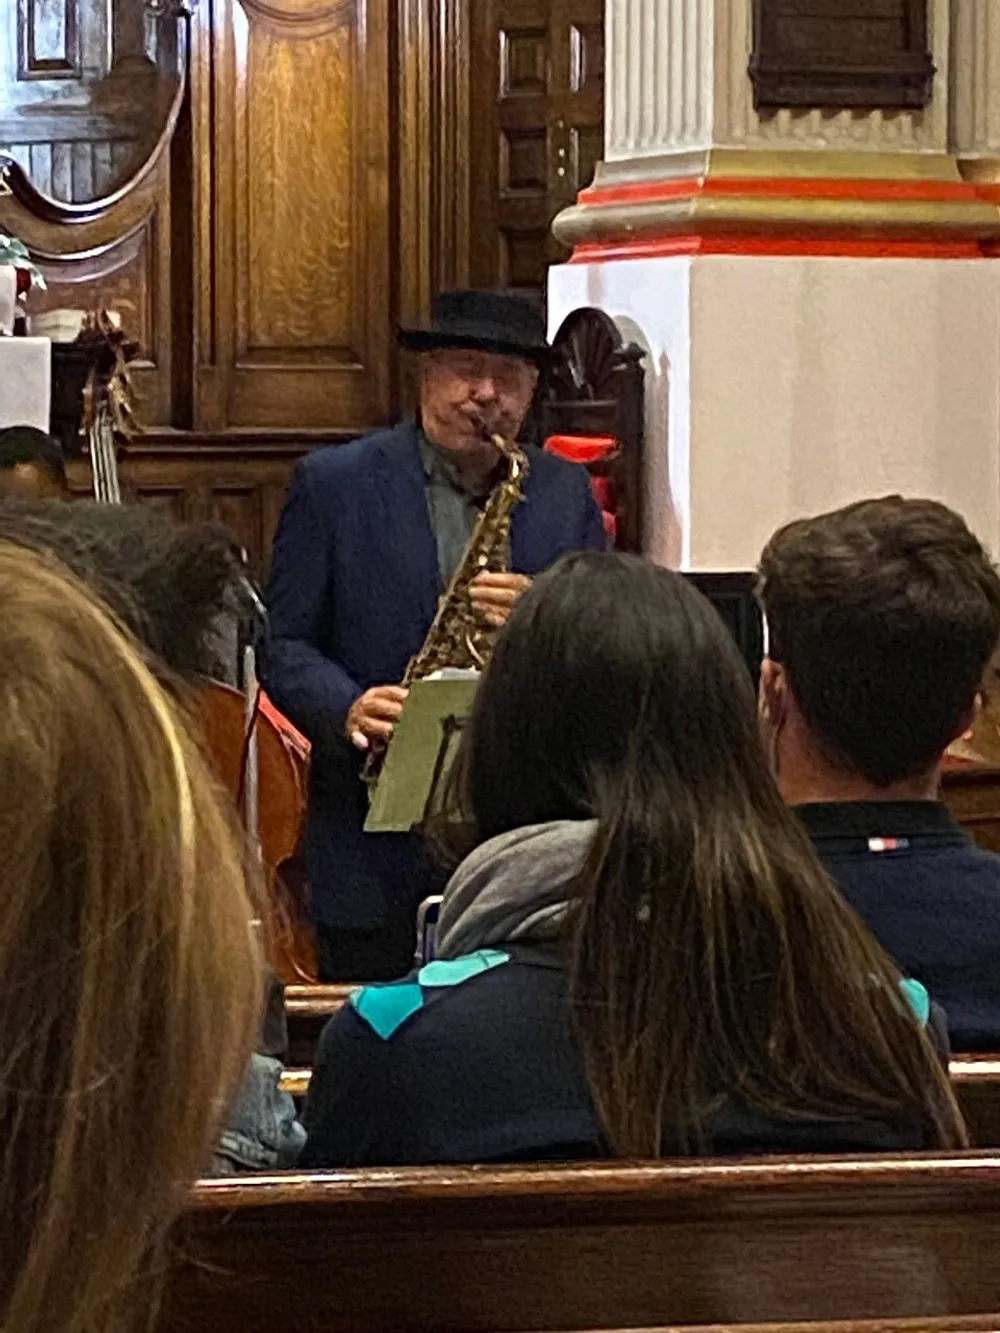 A man wearing a hat is playing the saxophone in front of an audience seated in wooden pews